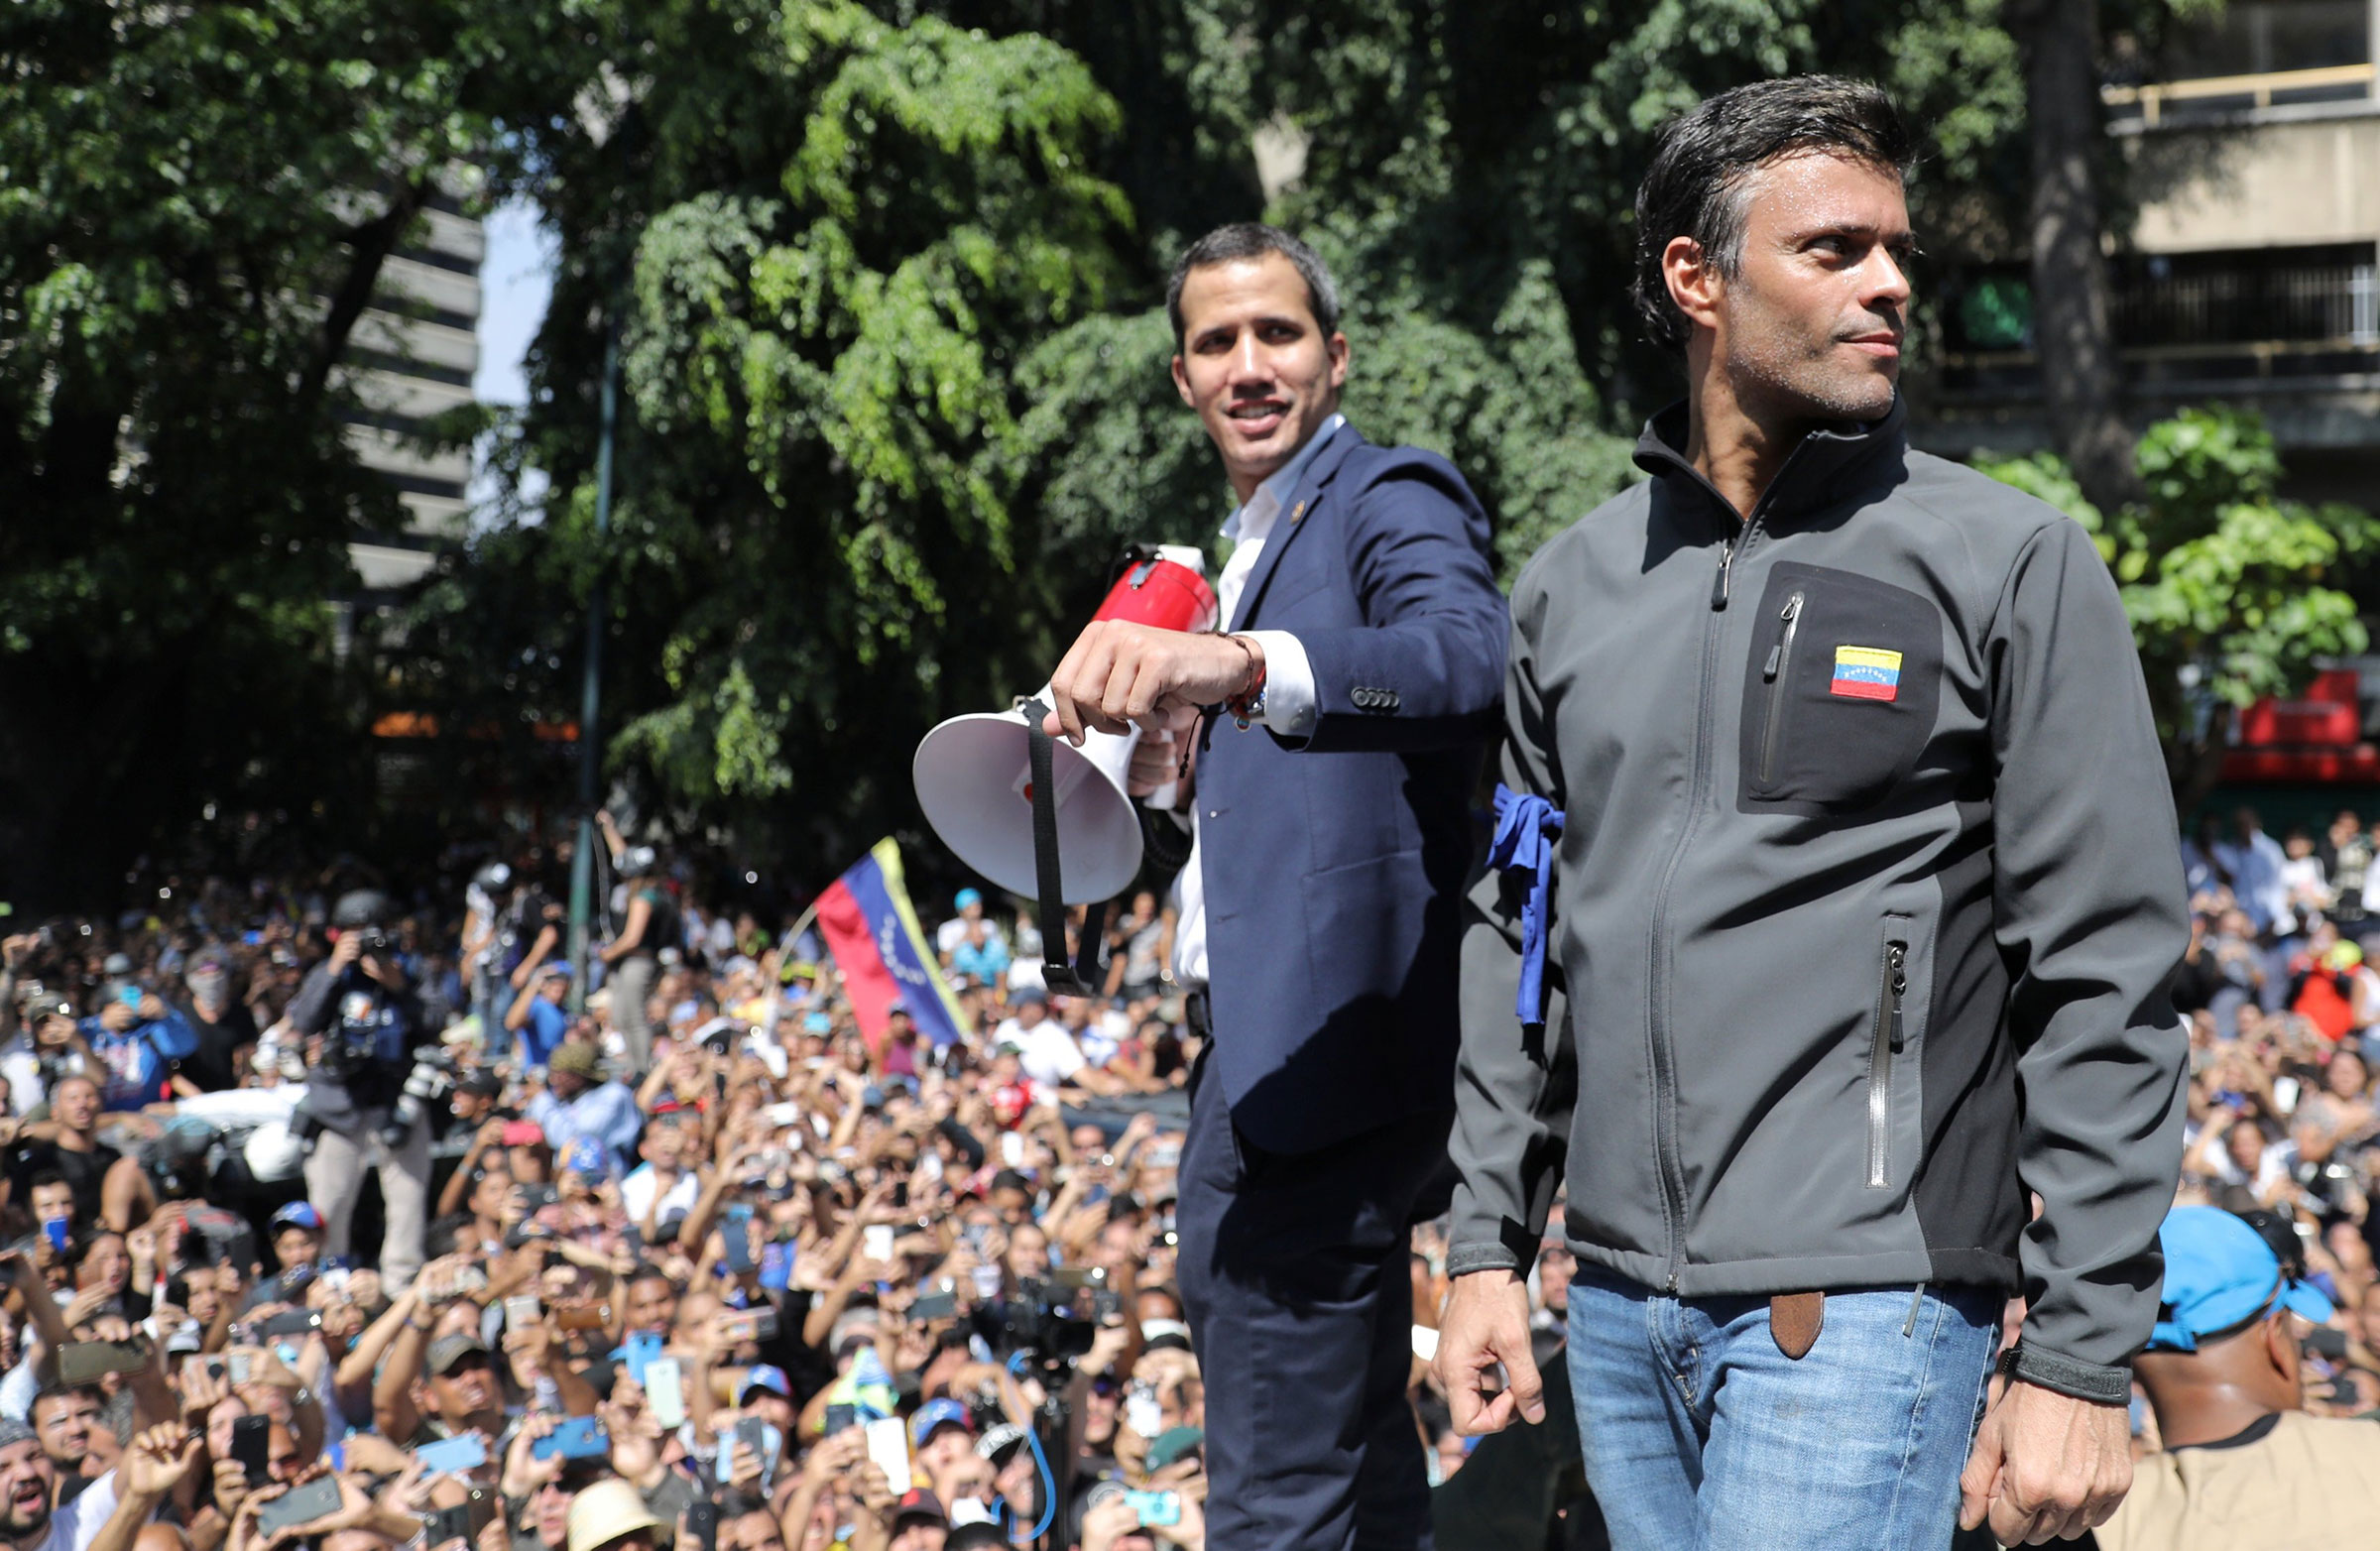 Venezuelan opposition leaders Guaido and Lopez address supporters in Caracas